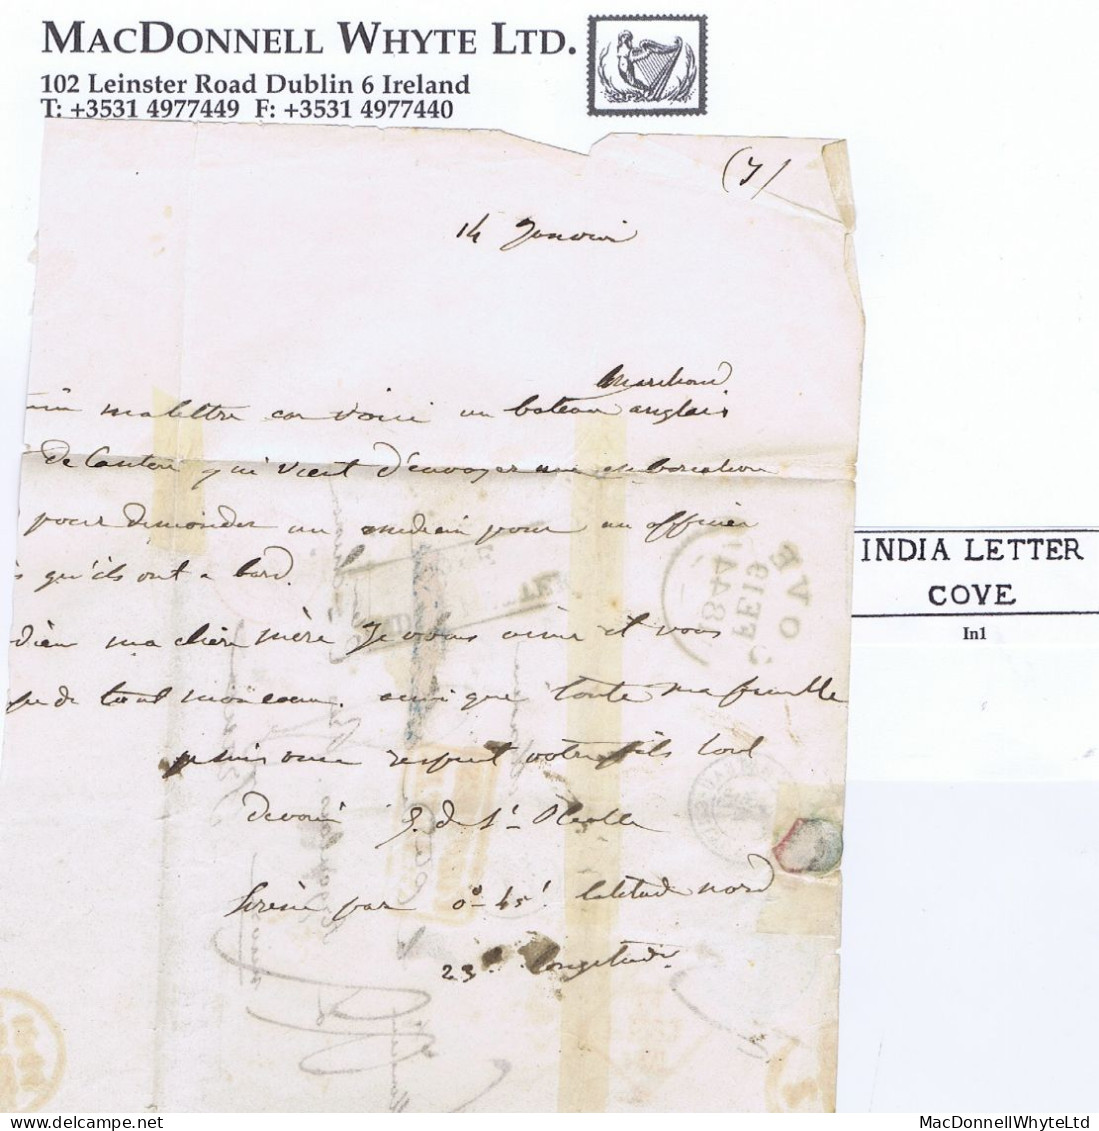 Ireland Maritime Cork 1844 Cover To France With Boxed INDIA LETTER/COVE And COVE FE 19 1844 Cds - Prephilately